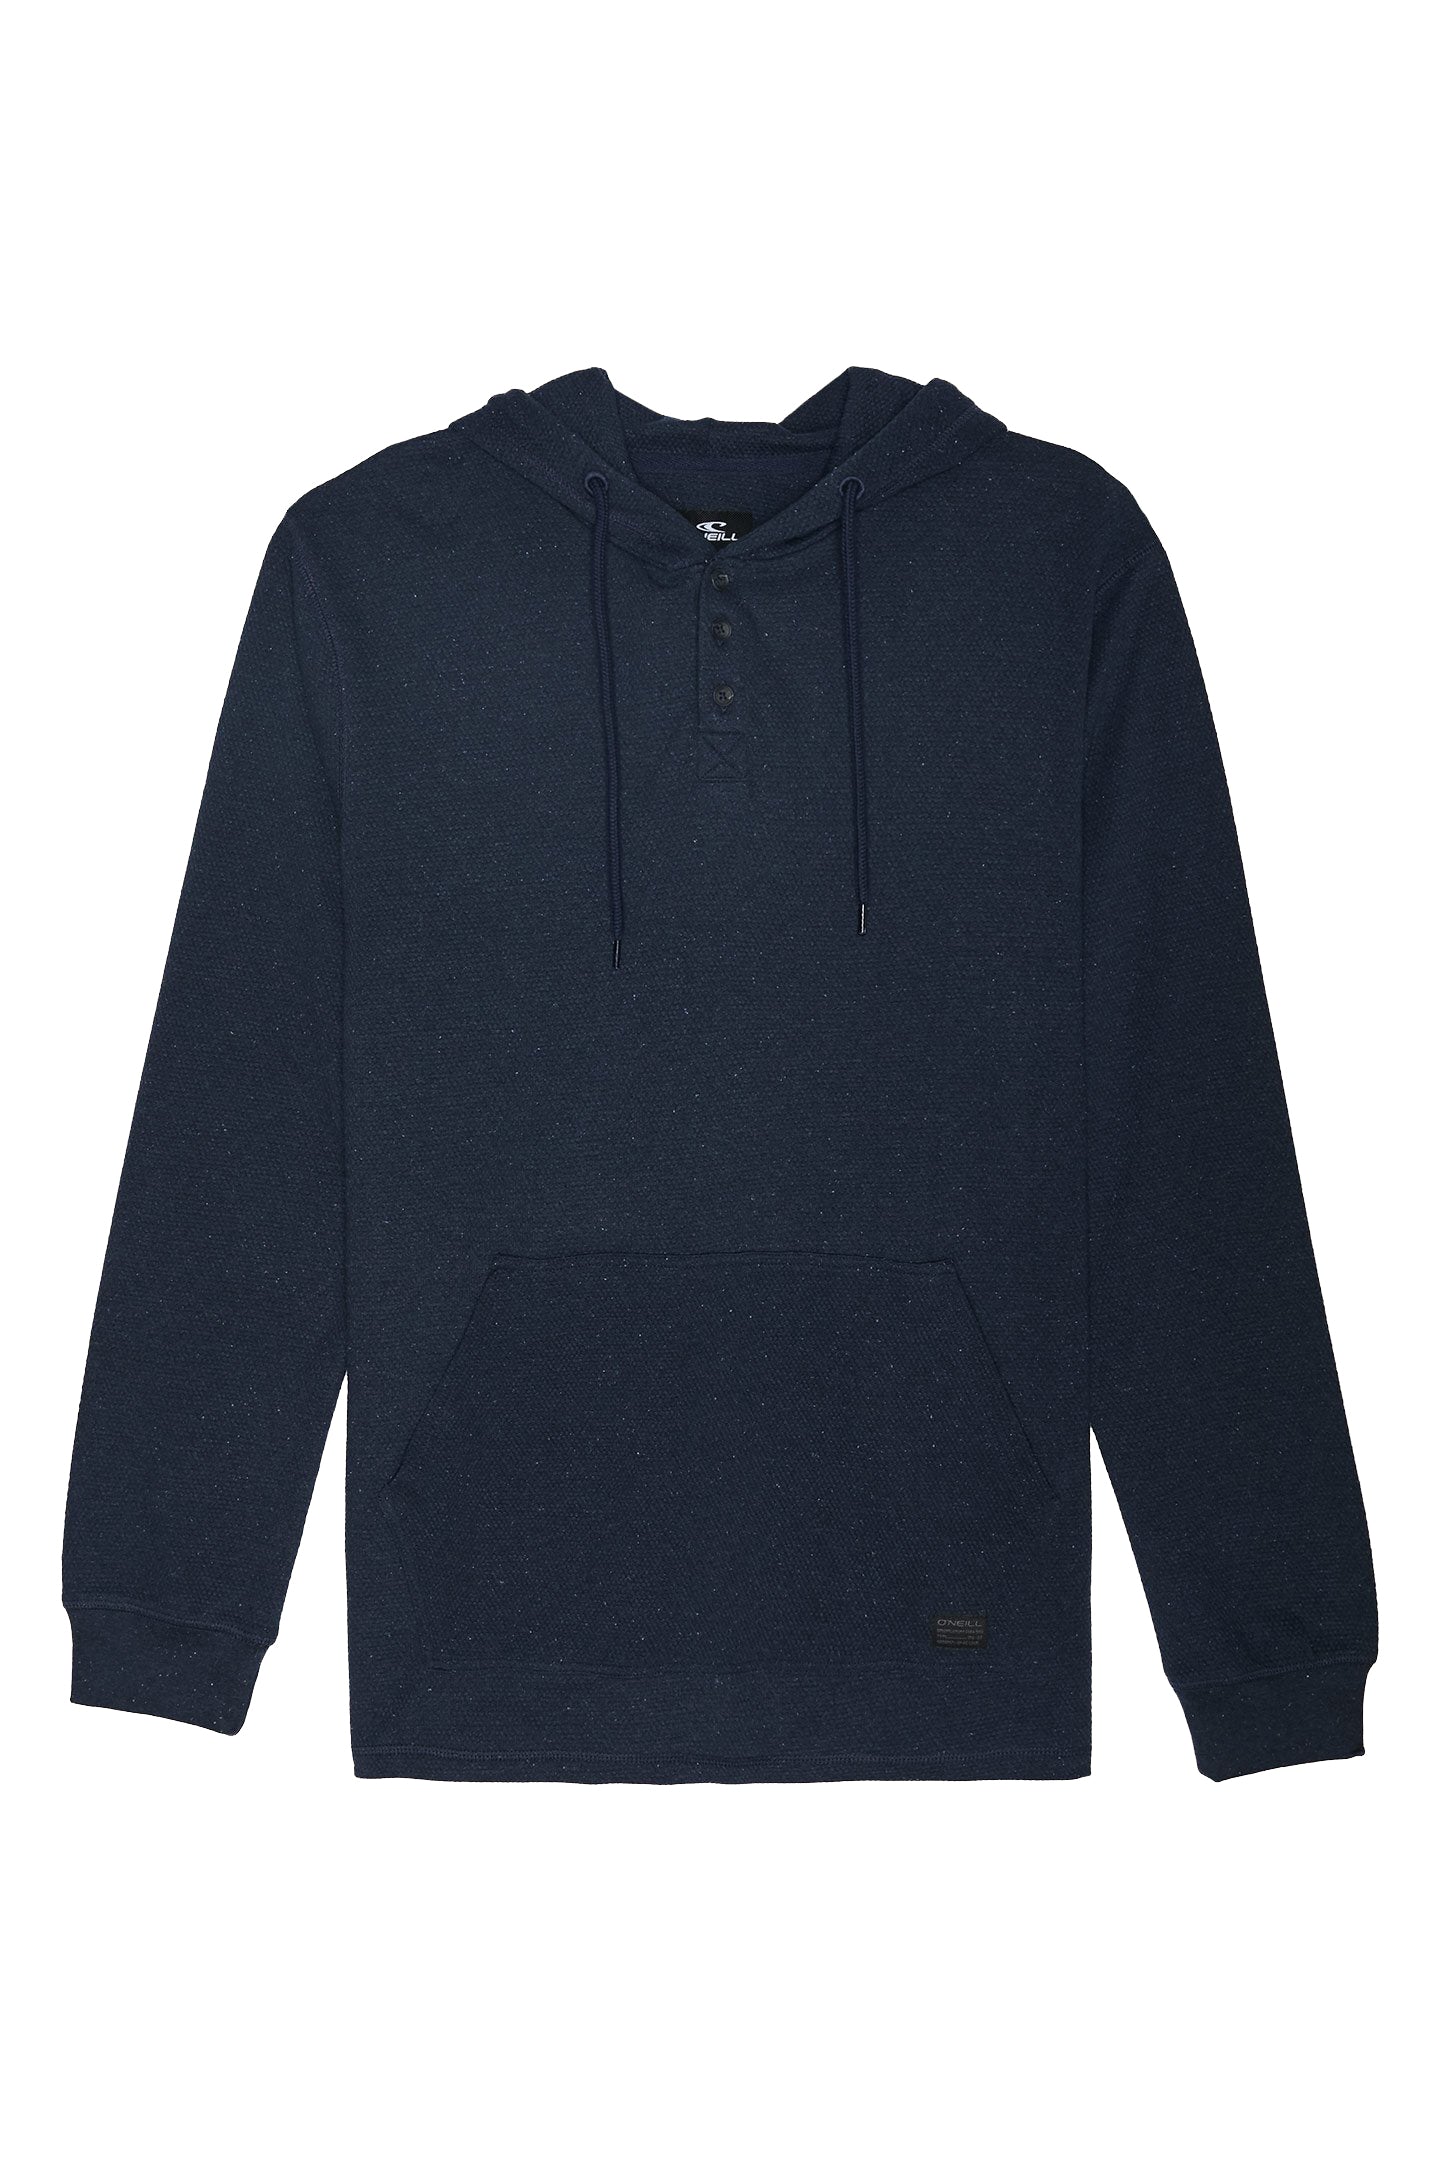 O'neill Apollo Pullover Hoodie NVY-Navy M